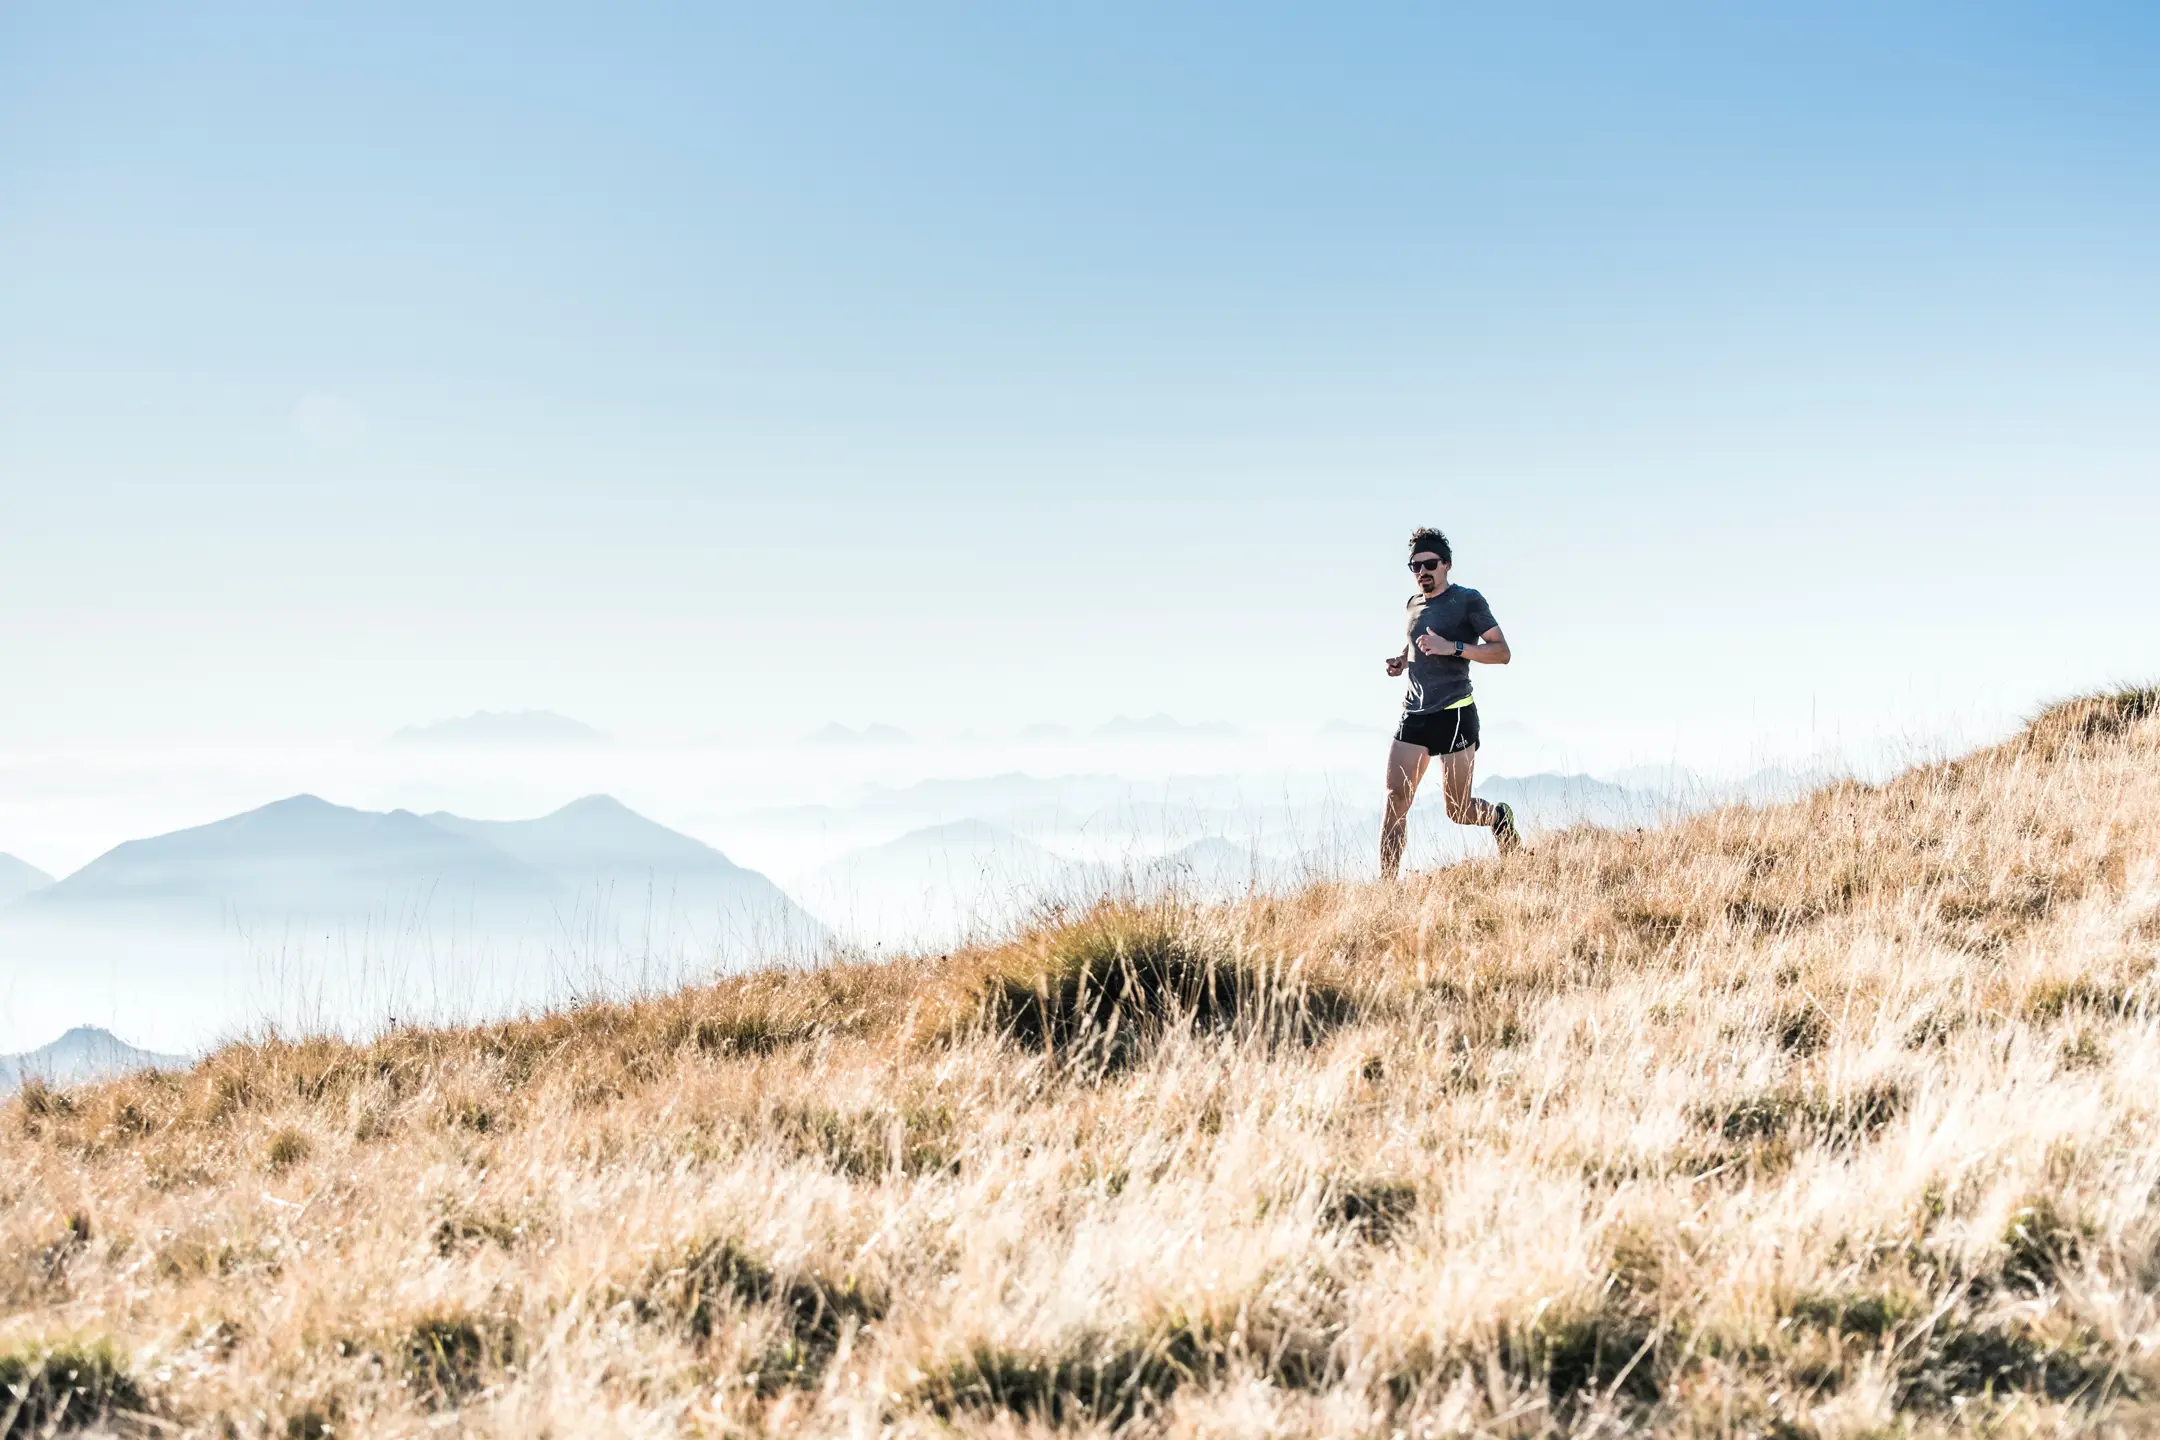 athlete running through field of dry grass mountains in background